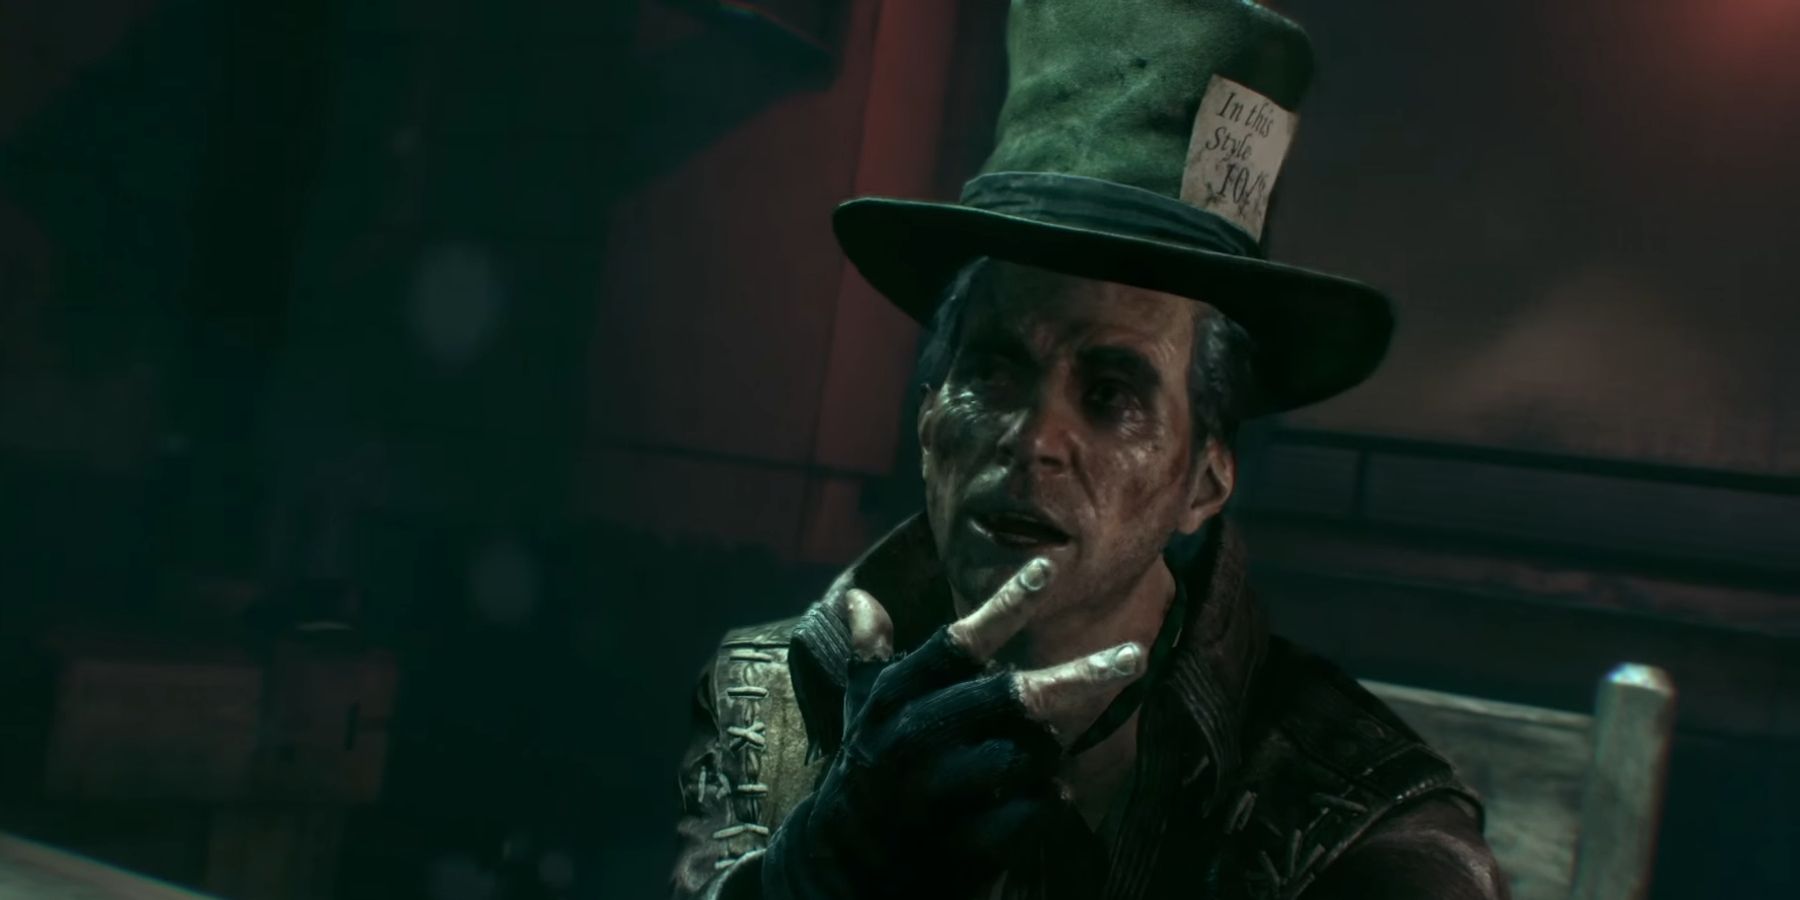 The Mad Hatter in the interrogation room in Batman Arkham Knight